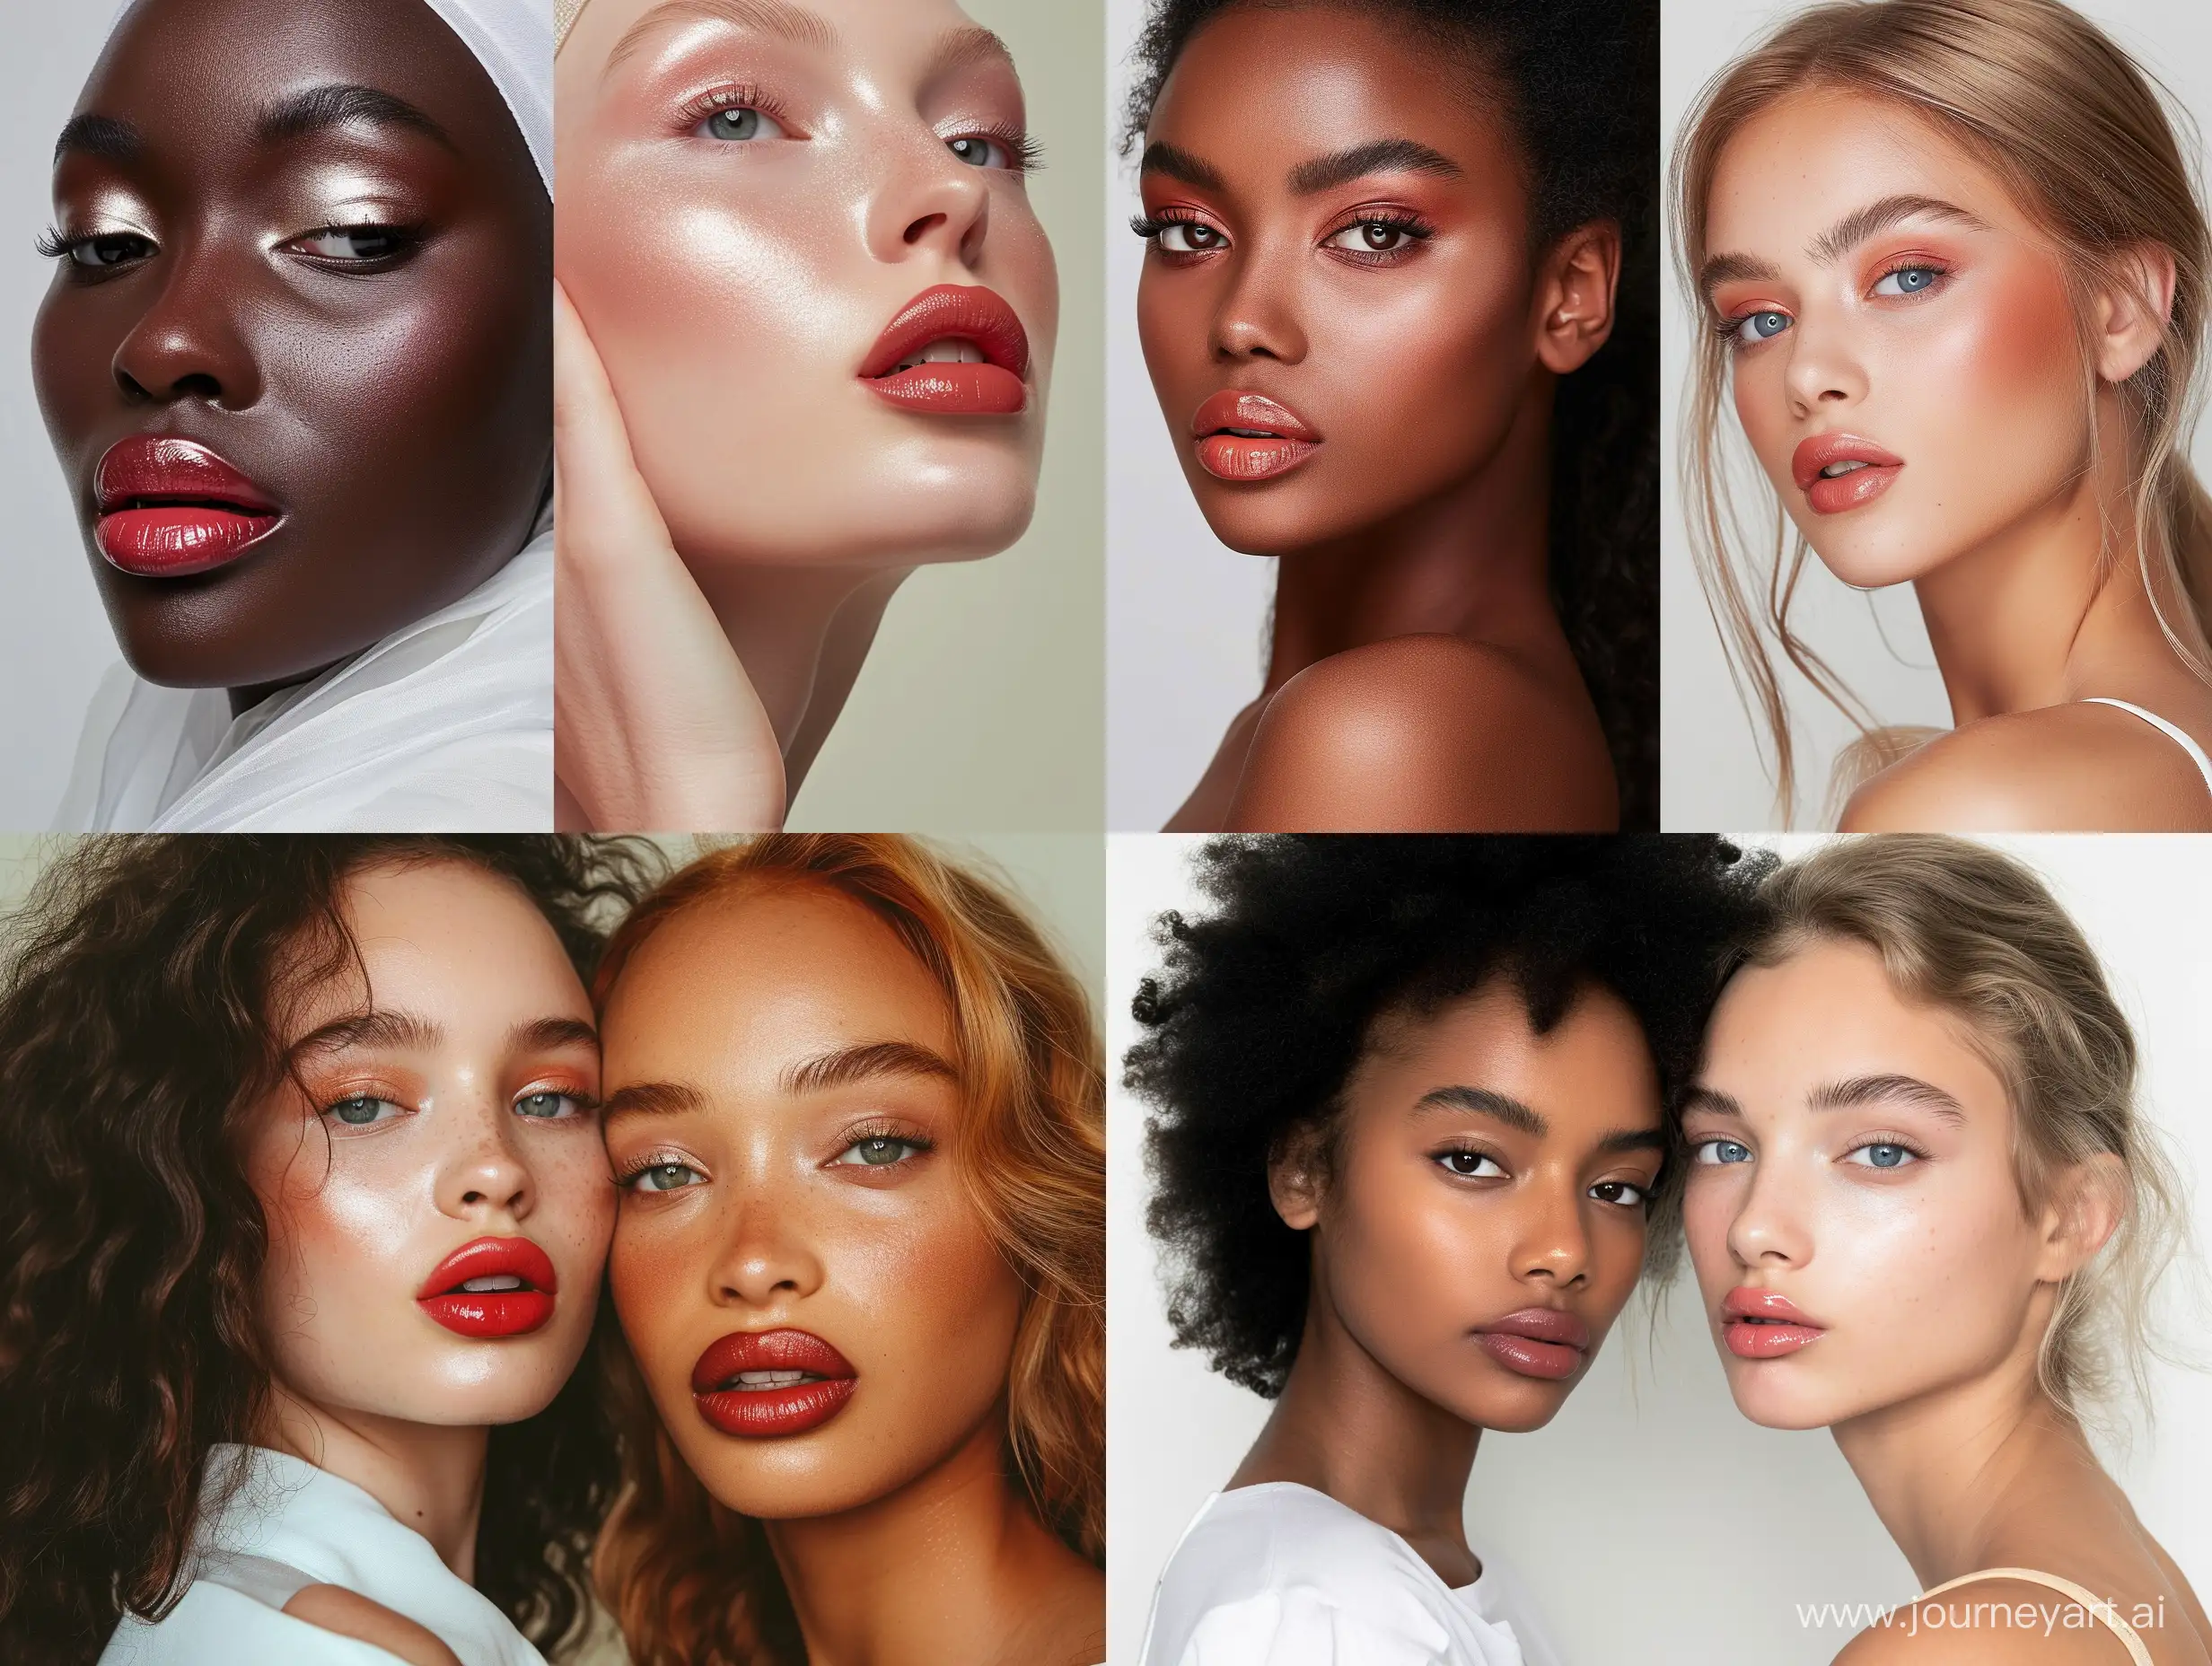 Chic-Collaboration-Stylish-Lip-Gloss-and-Makeup-Showcase-by-Diverse-Models